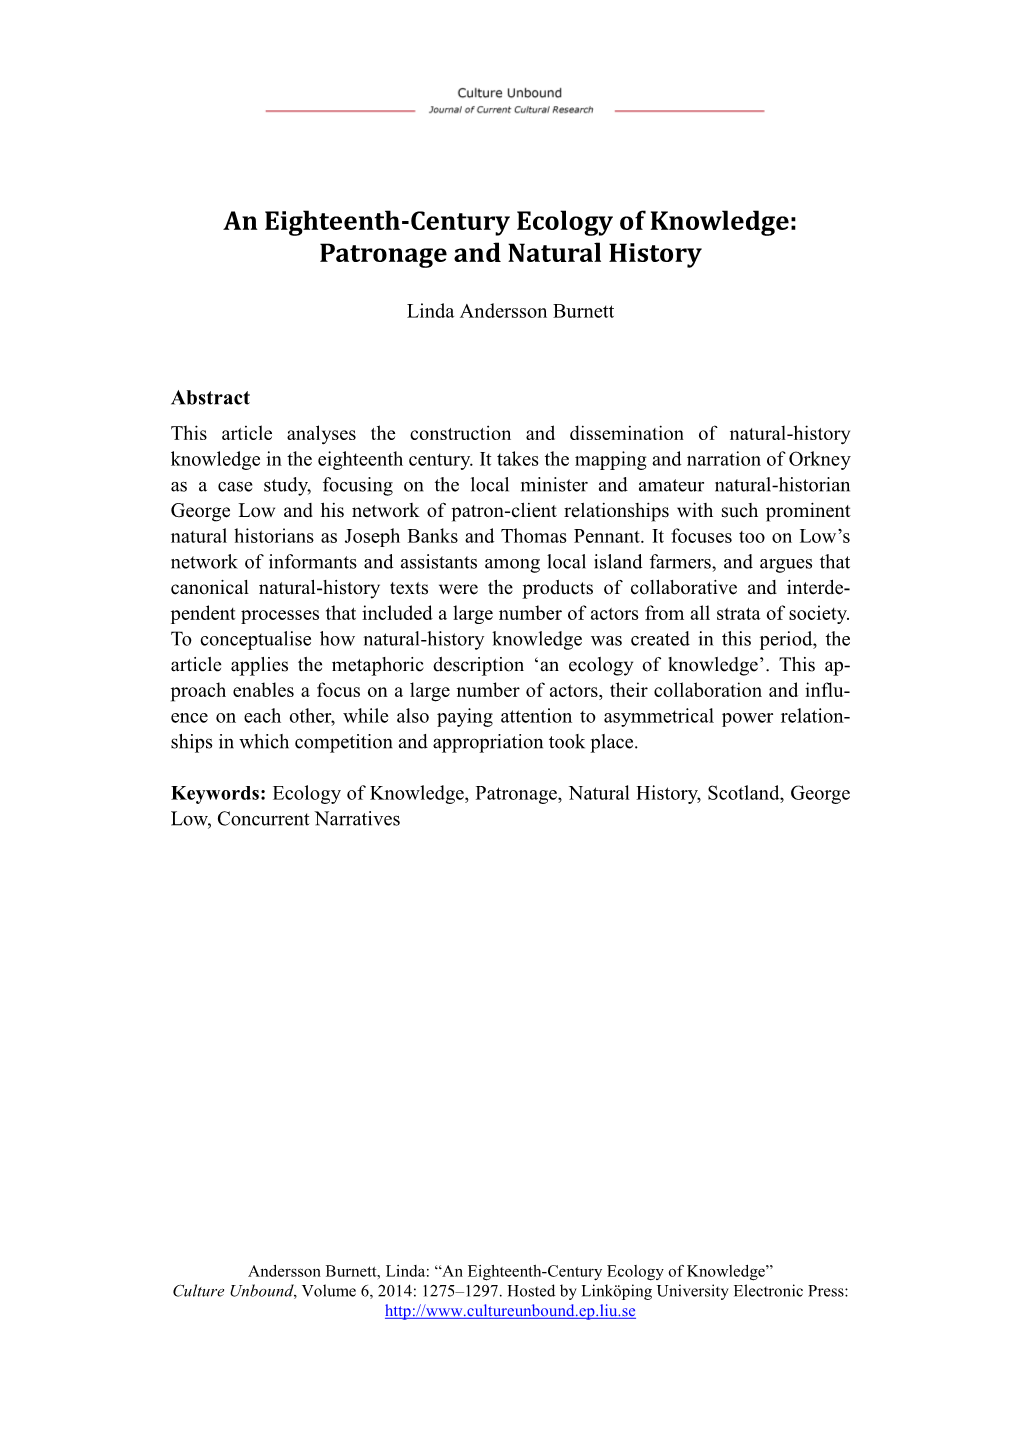 An Eighteenth-Century Ecology of Knowledge: Patronage and Natural History